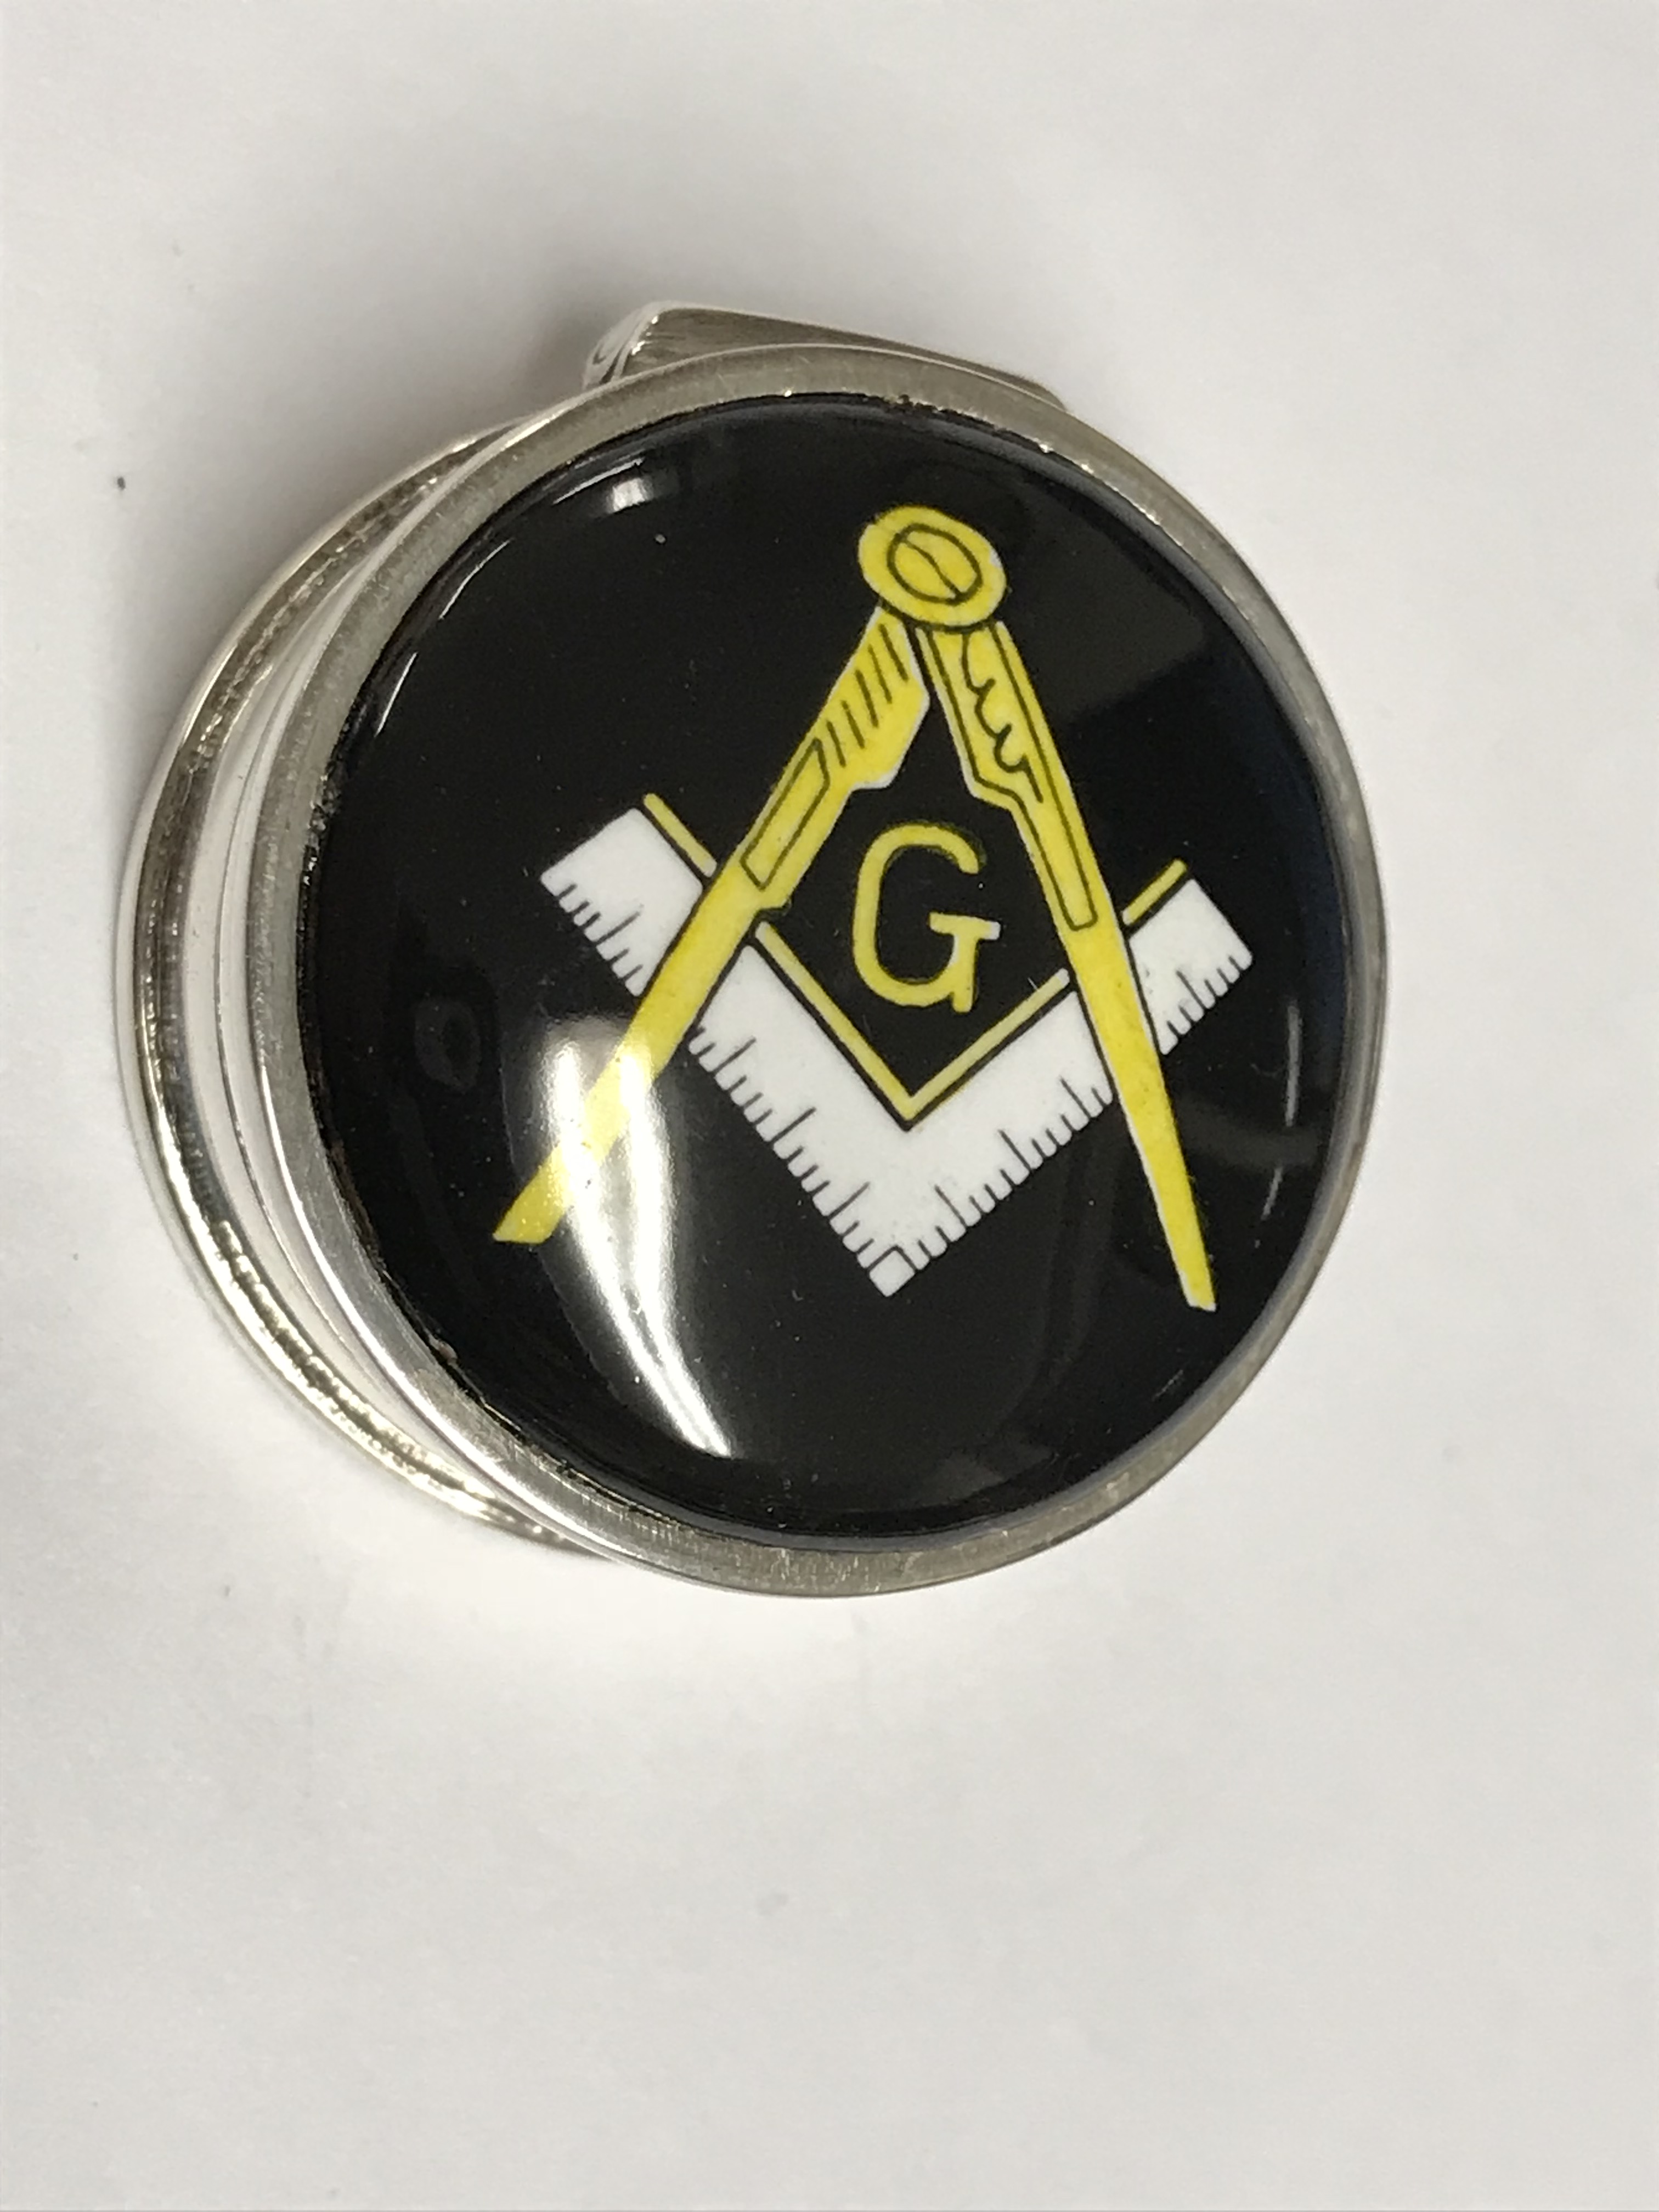 Silver pill box with enamel masonic image to the lid